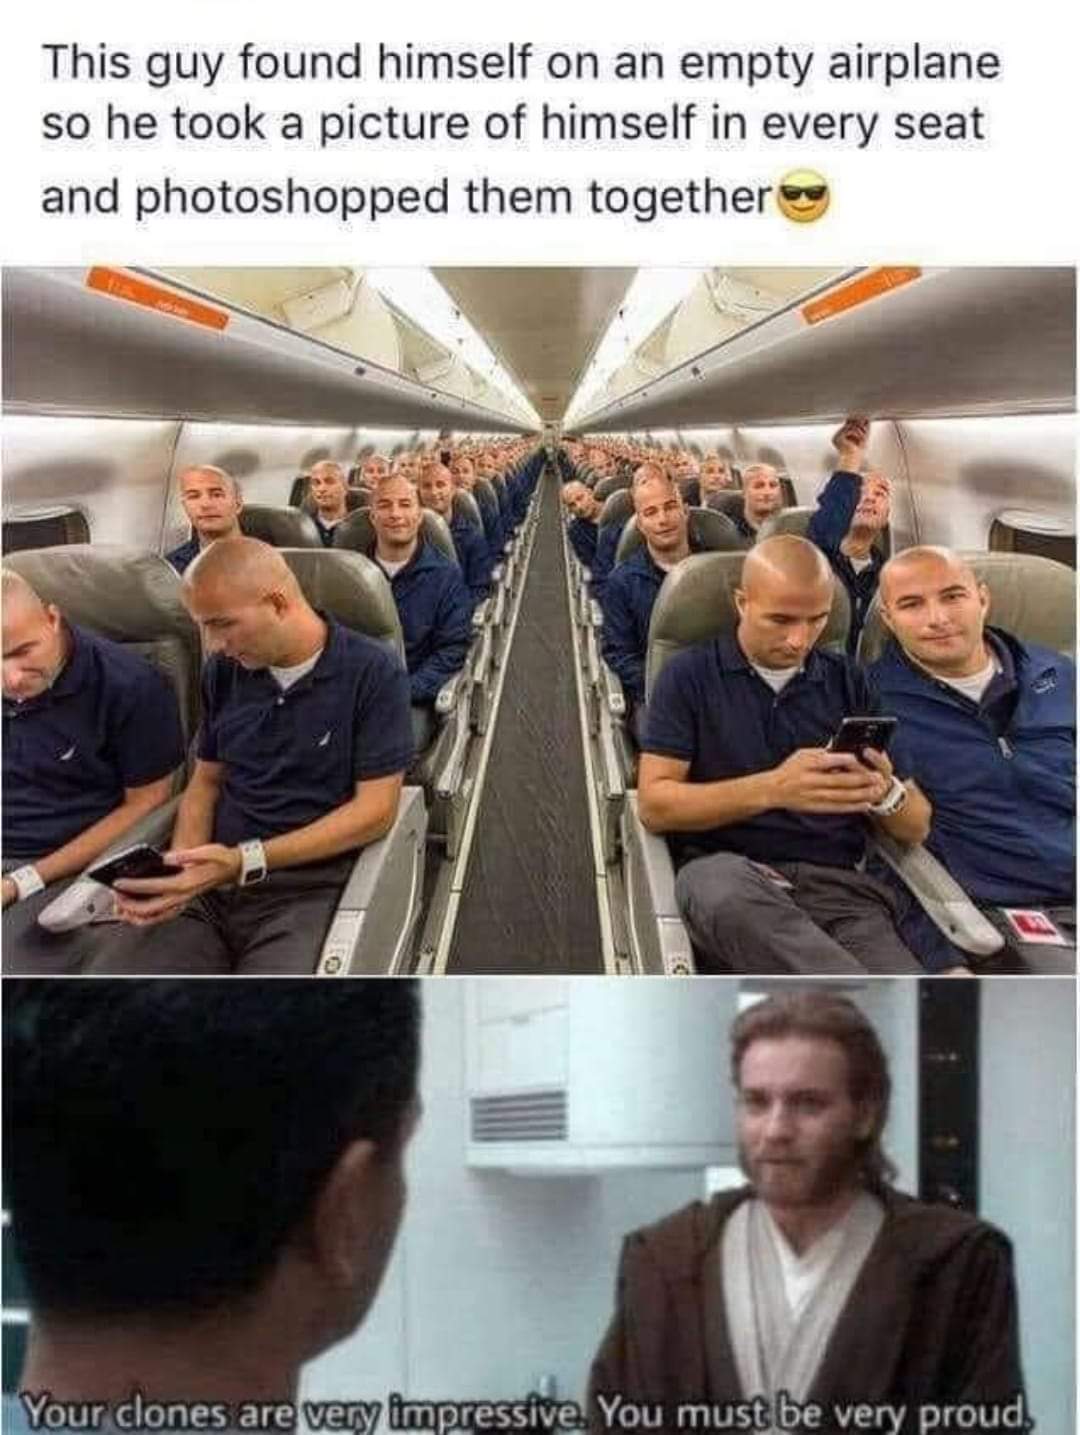 guy was alone in a flight so he clicked his photo on every seat and later edited it - This guy found himself on an empty airplane so he took a picture of himself in every seat and photoshopped them together Your clones are very impressive. You must be ver